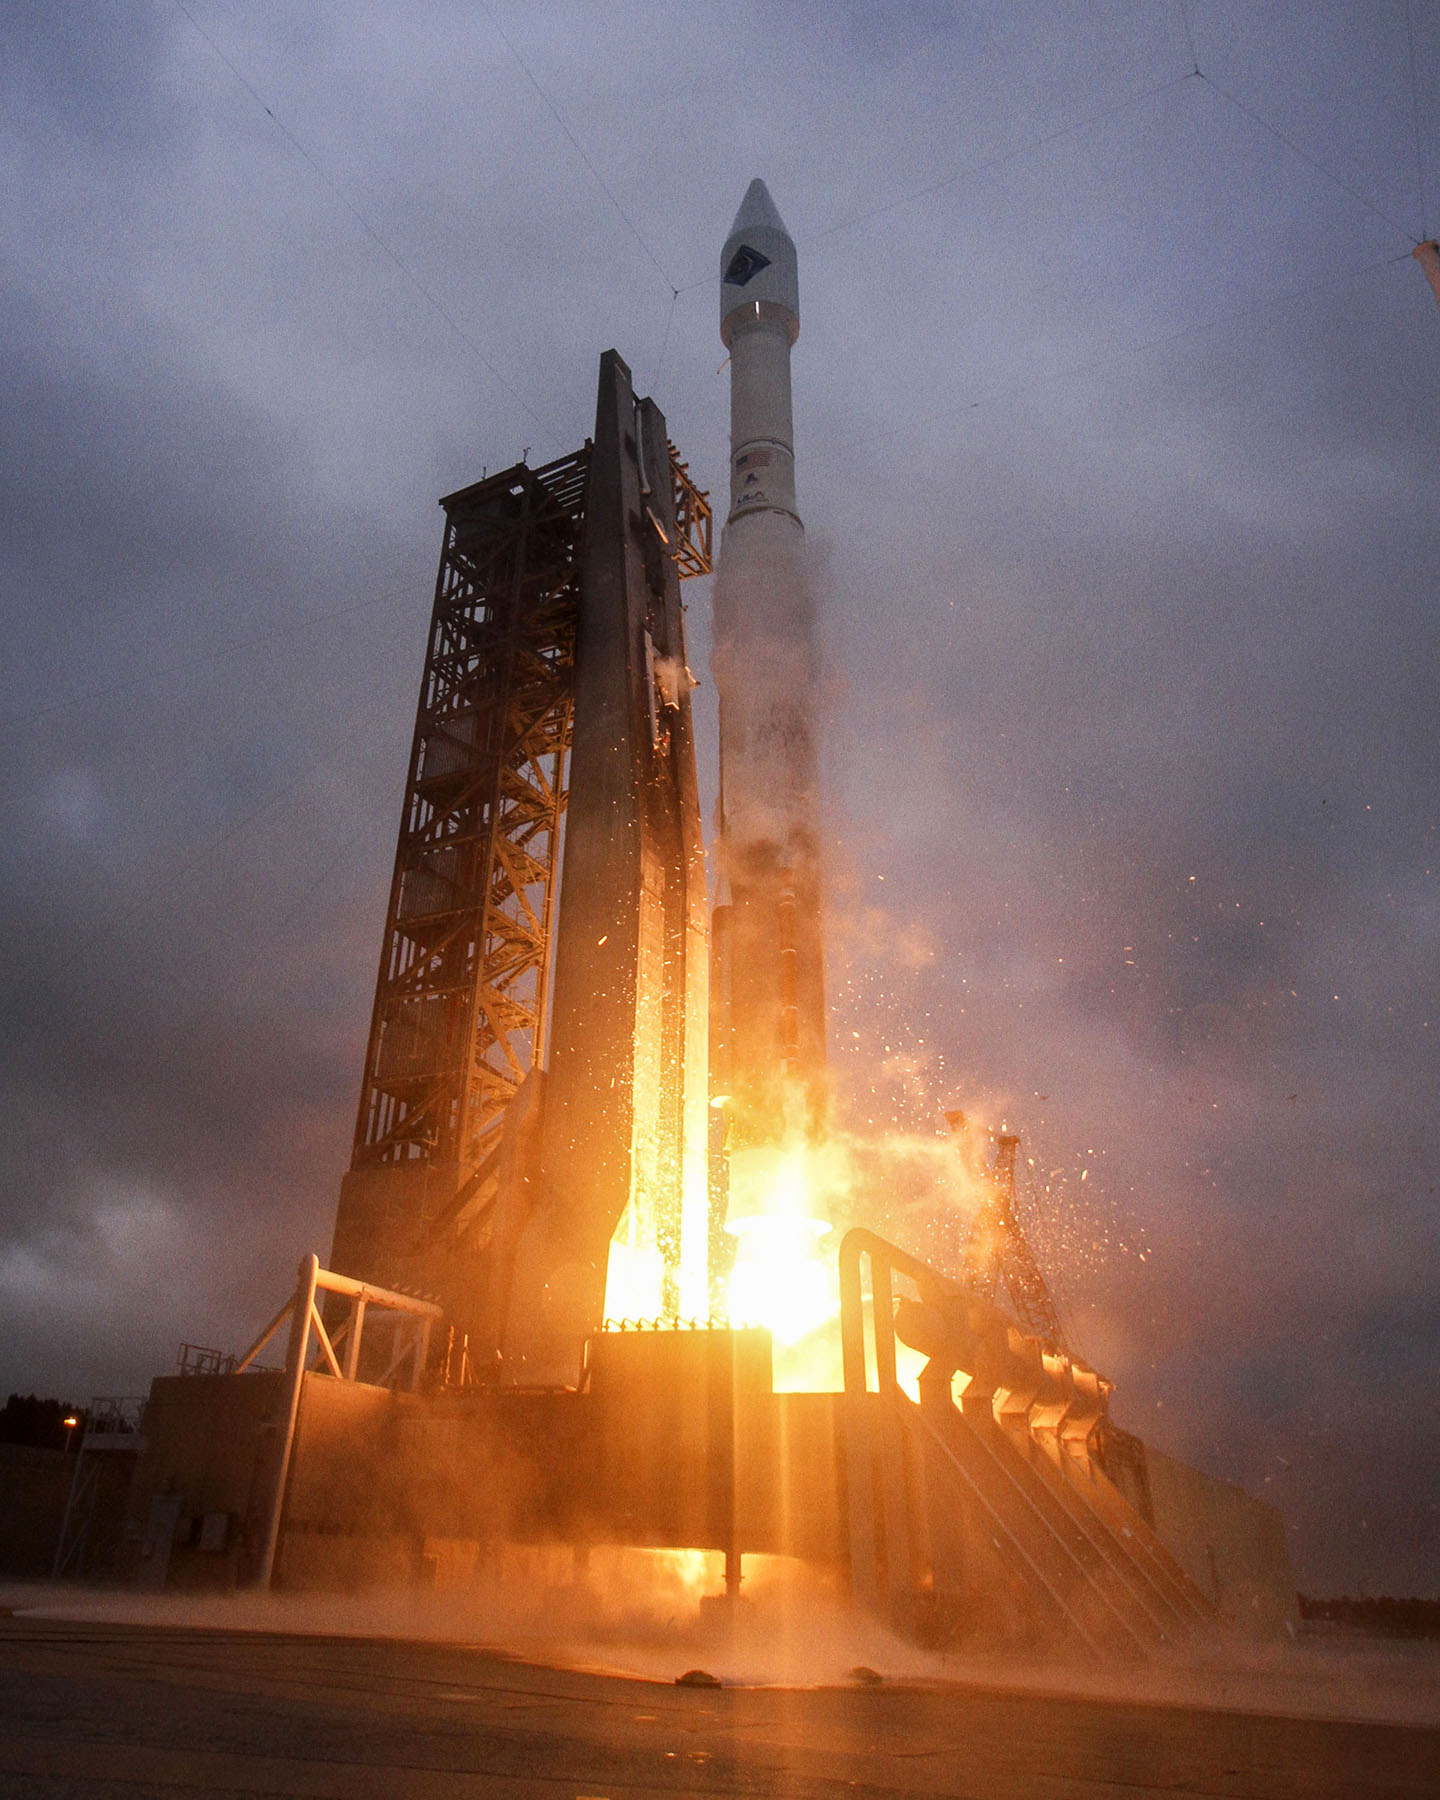 Atlas 5 launches Cygnus to space station. Credit: United Launch Alliance. Used with permission.